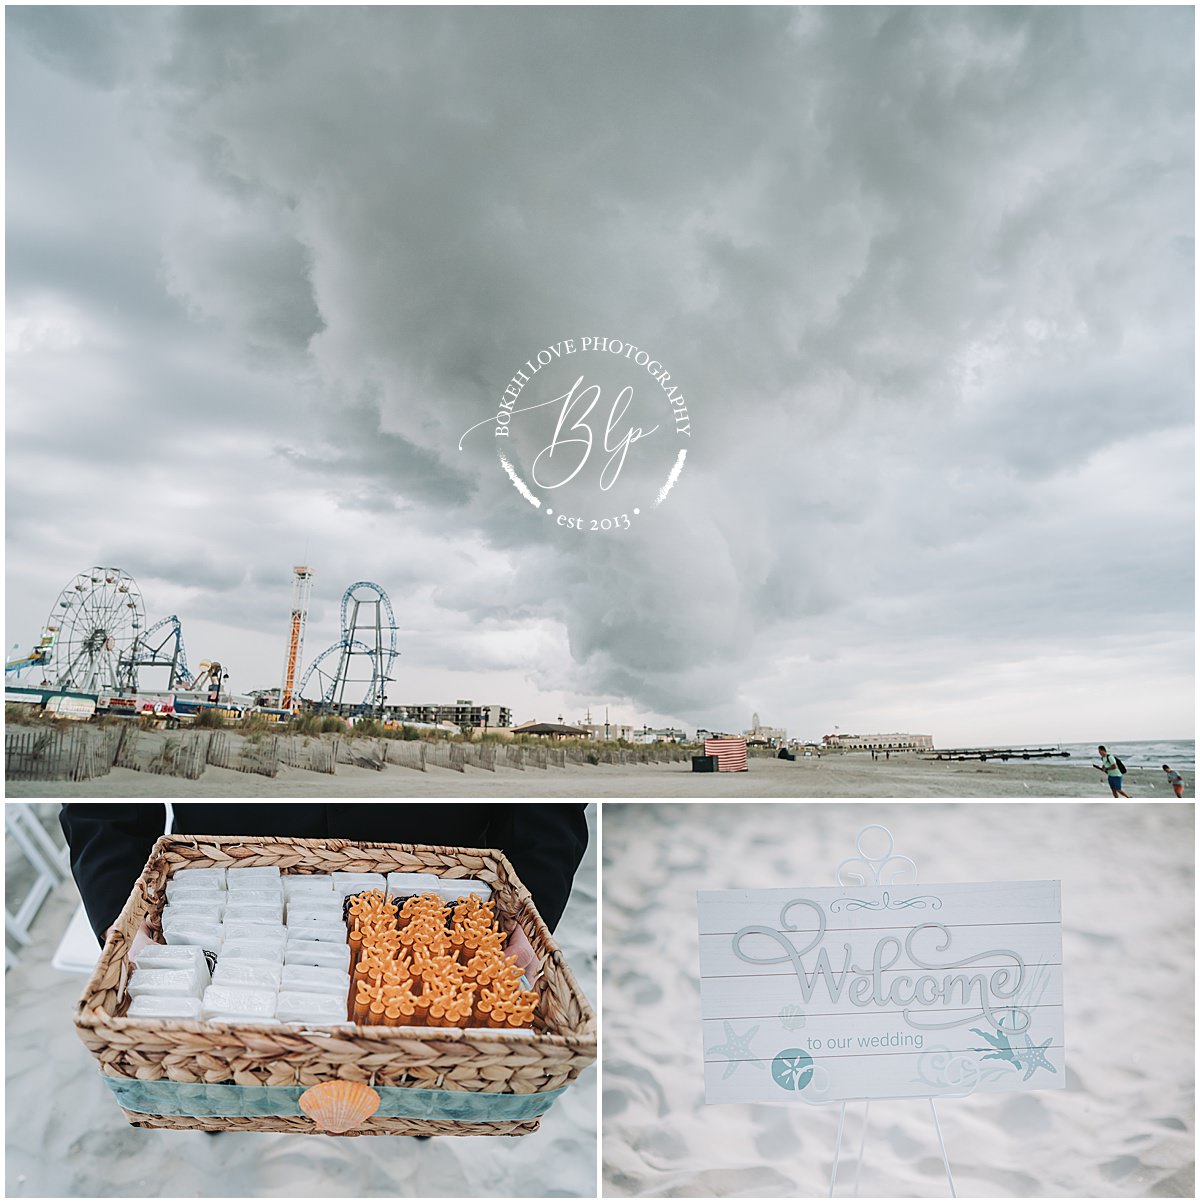 Photography by Bokeh Love Photography, ceremony details, wedding ceremony on beach at the Flanders Hotel in Ocean City